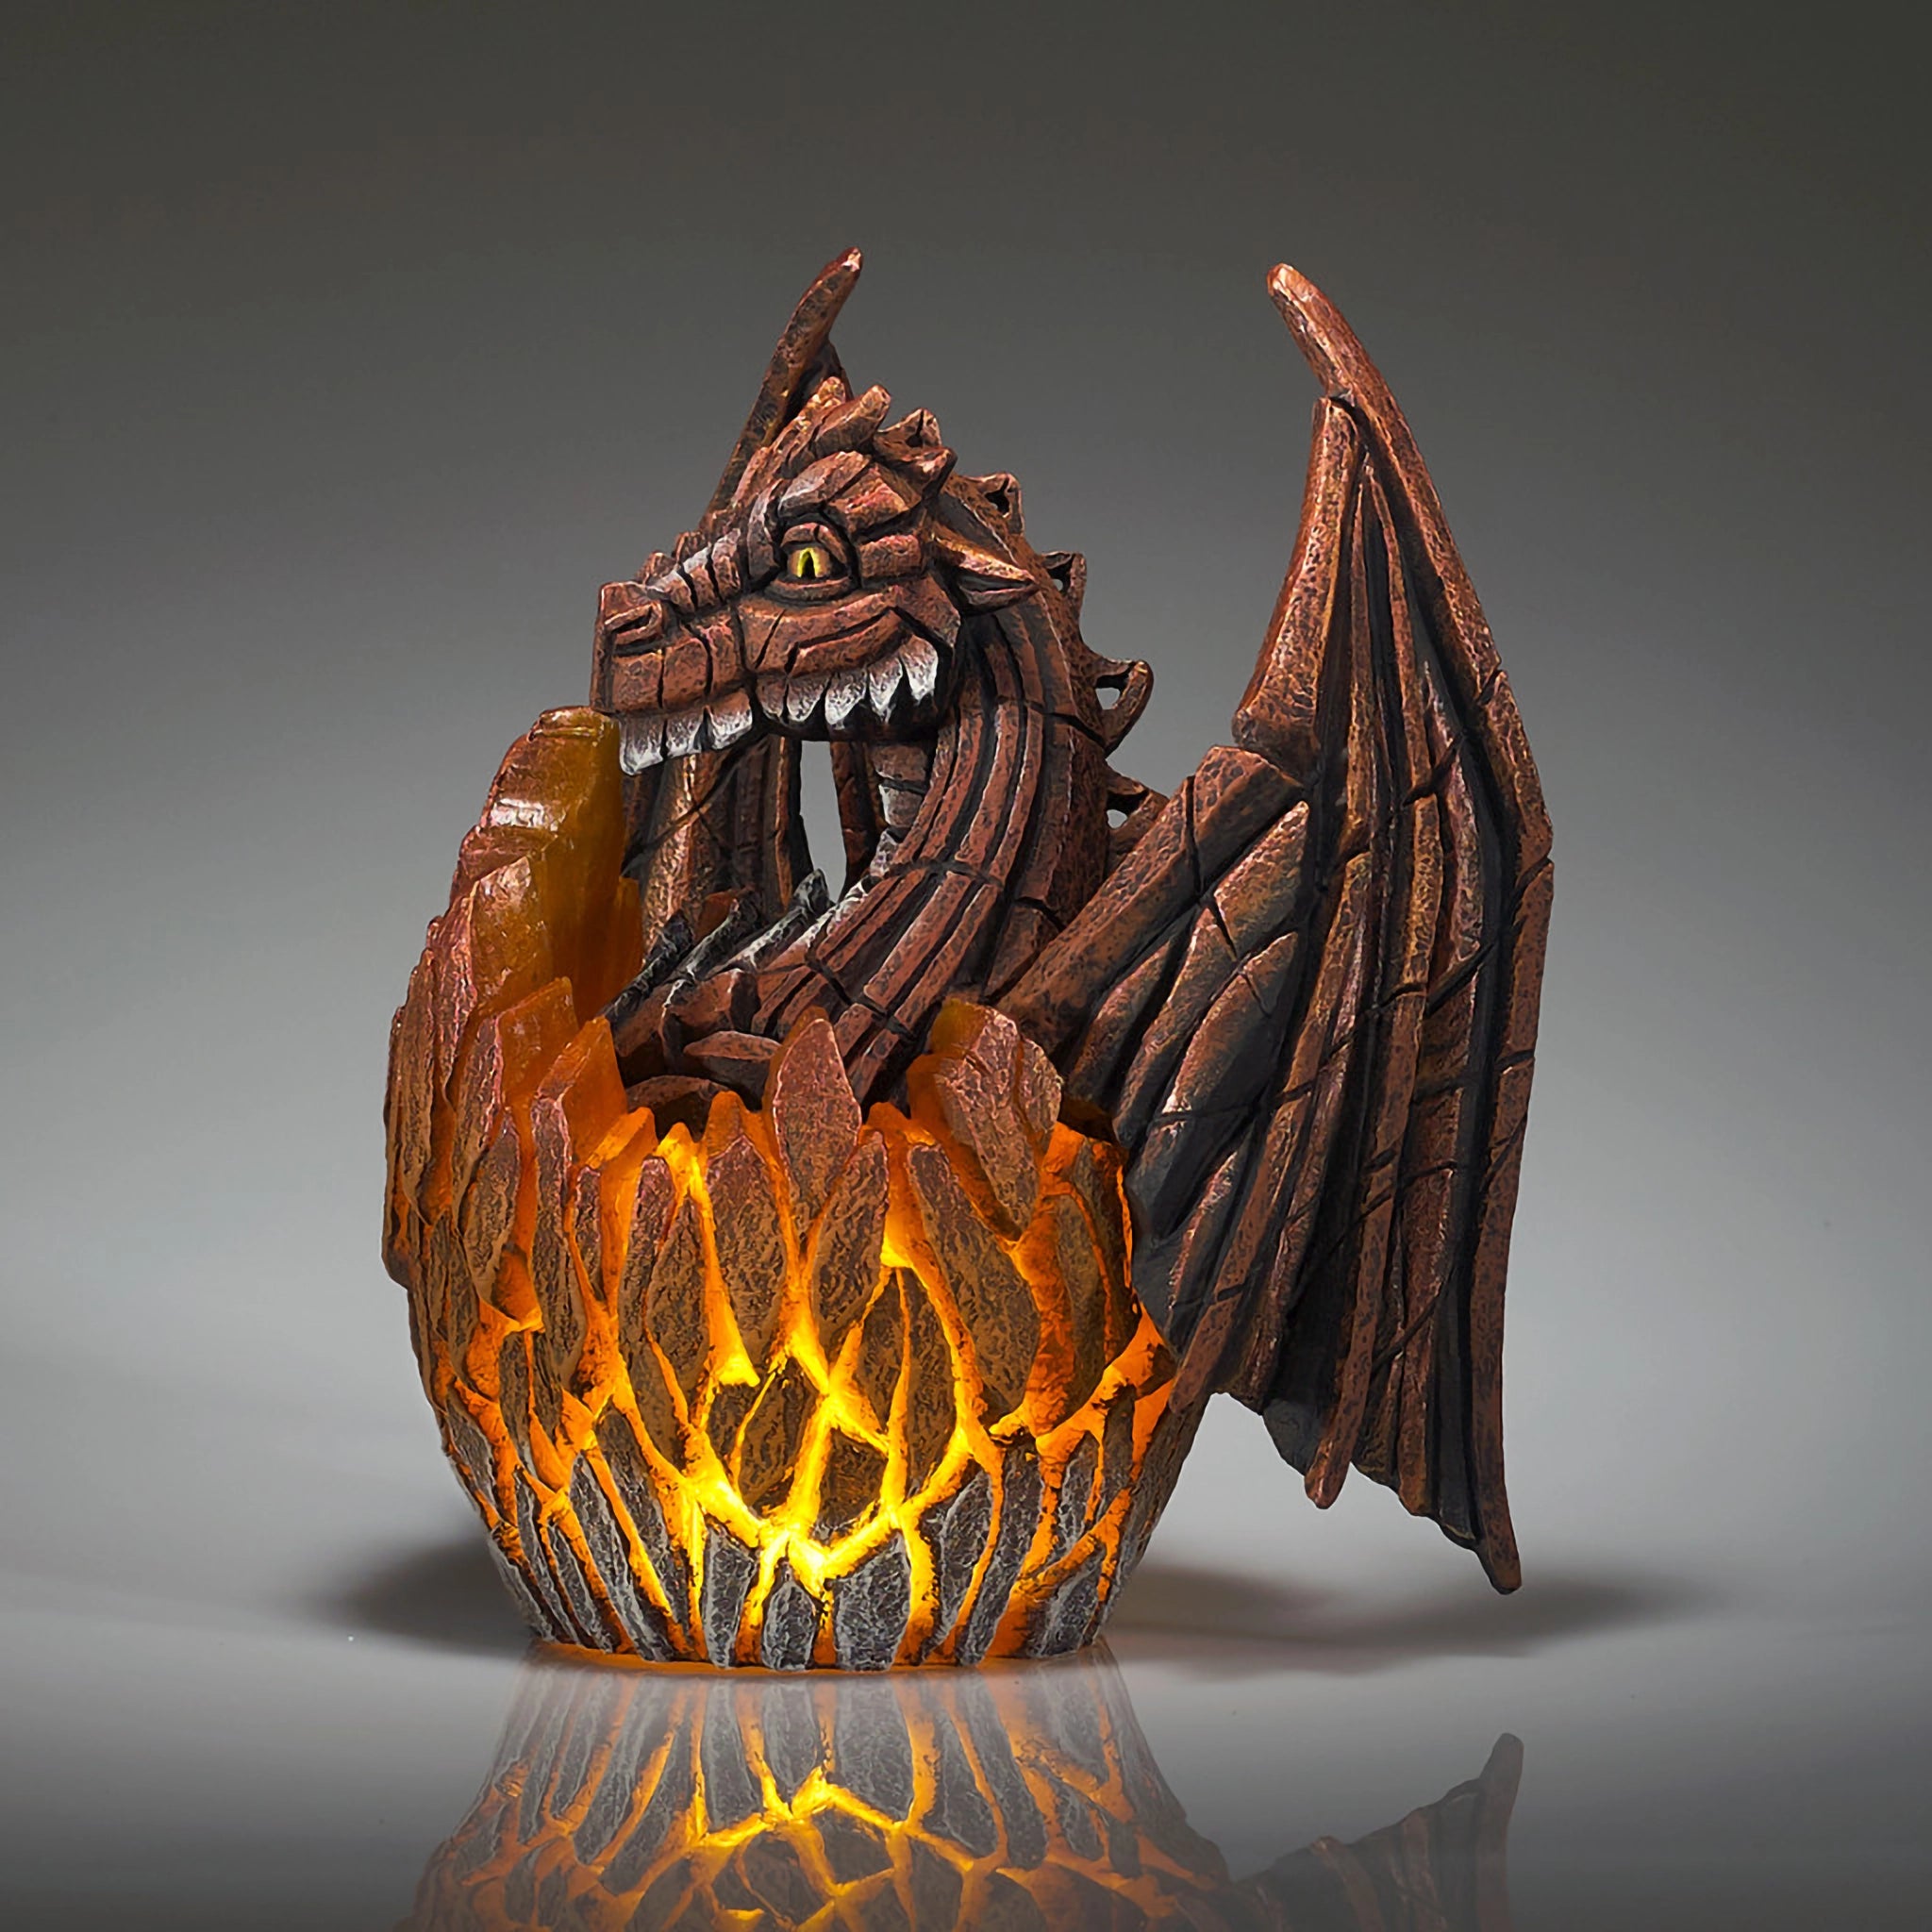 Side view of a modern sculpture of a baby dragon hatching from an egg that lights up in copper